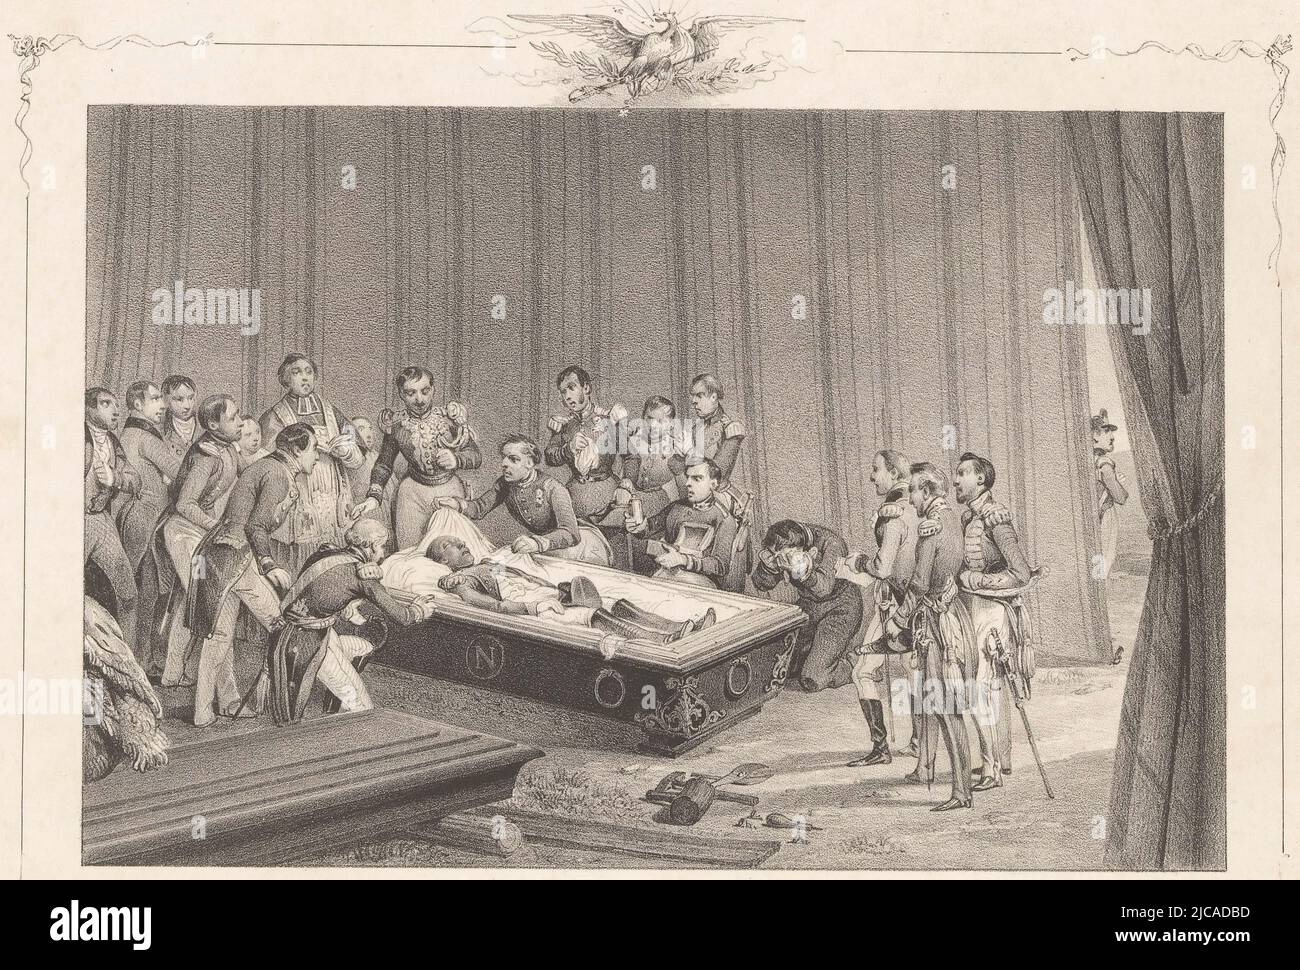 A French delegation opens Napoleon's coffin on the island of St Helena, before returning his remains to France, Napoleon's coffin is opened on St Helena Ouverture du cercueil de Napol, Victor Adam, (mentioned on object), print maker: Jean Baptiste Arnout, (mentioned on object), printer: Benard Lemercier & Cie, Paris, 1840 - 1841, paper, h 221 mm - w 308 mm Stock Photo